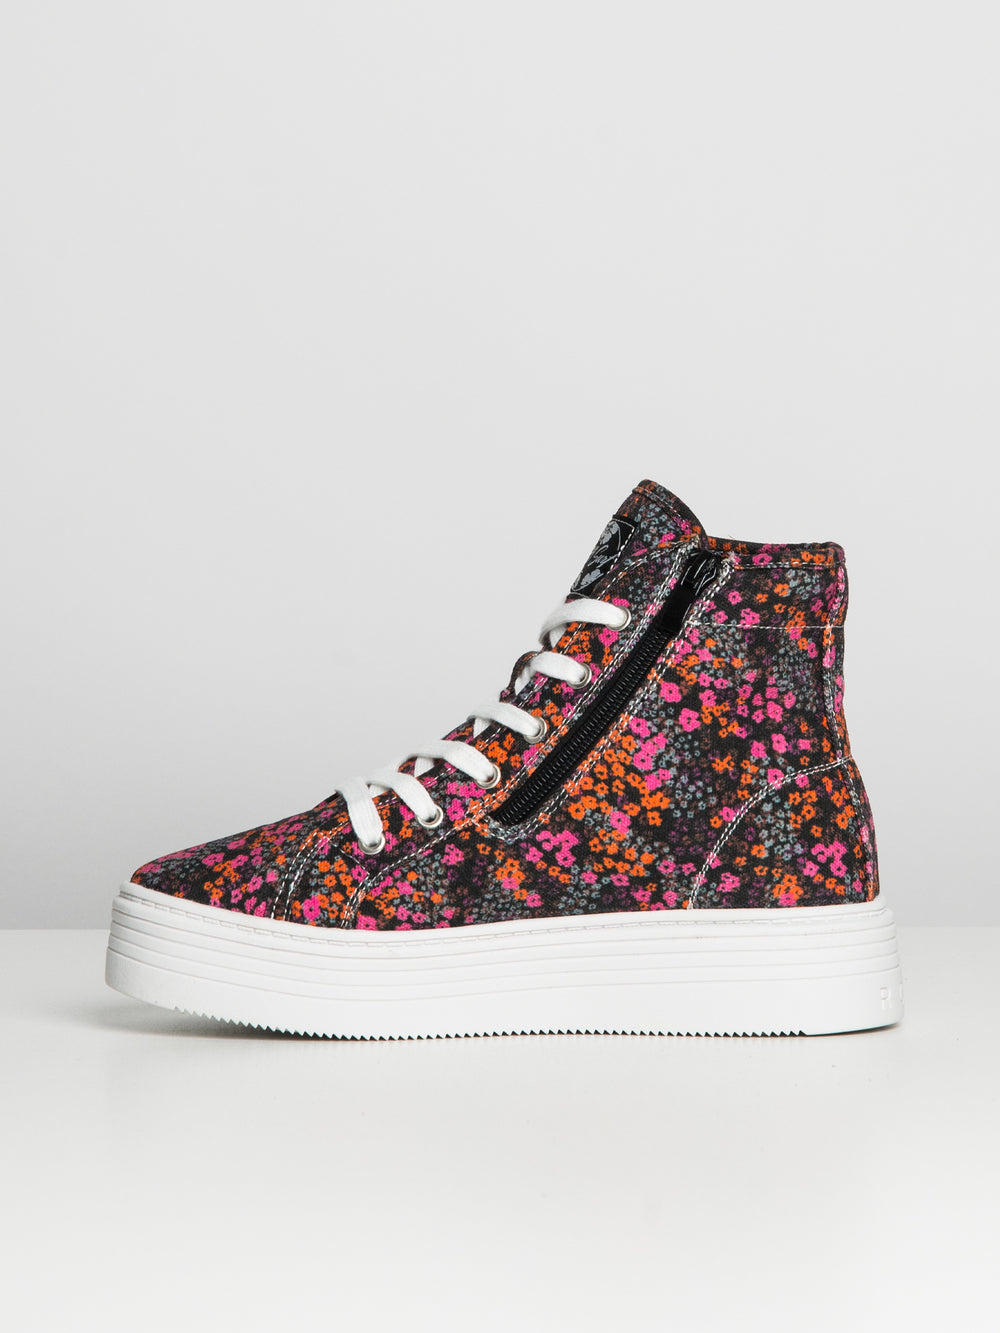 SNEAKER SHEILAHH 2.0 MID FLORAL